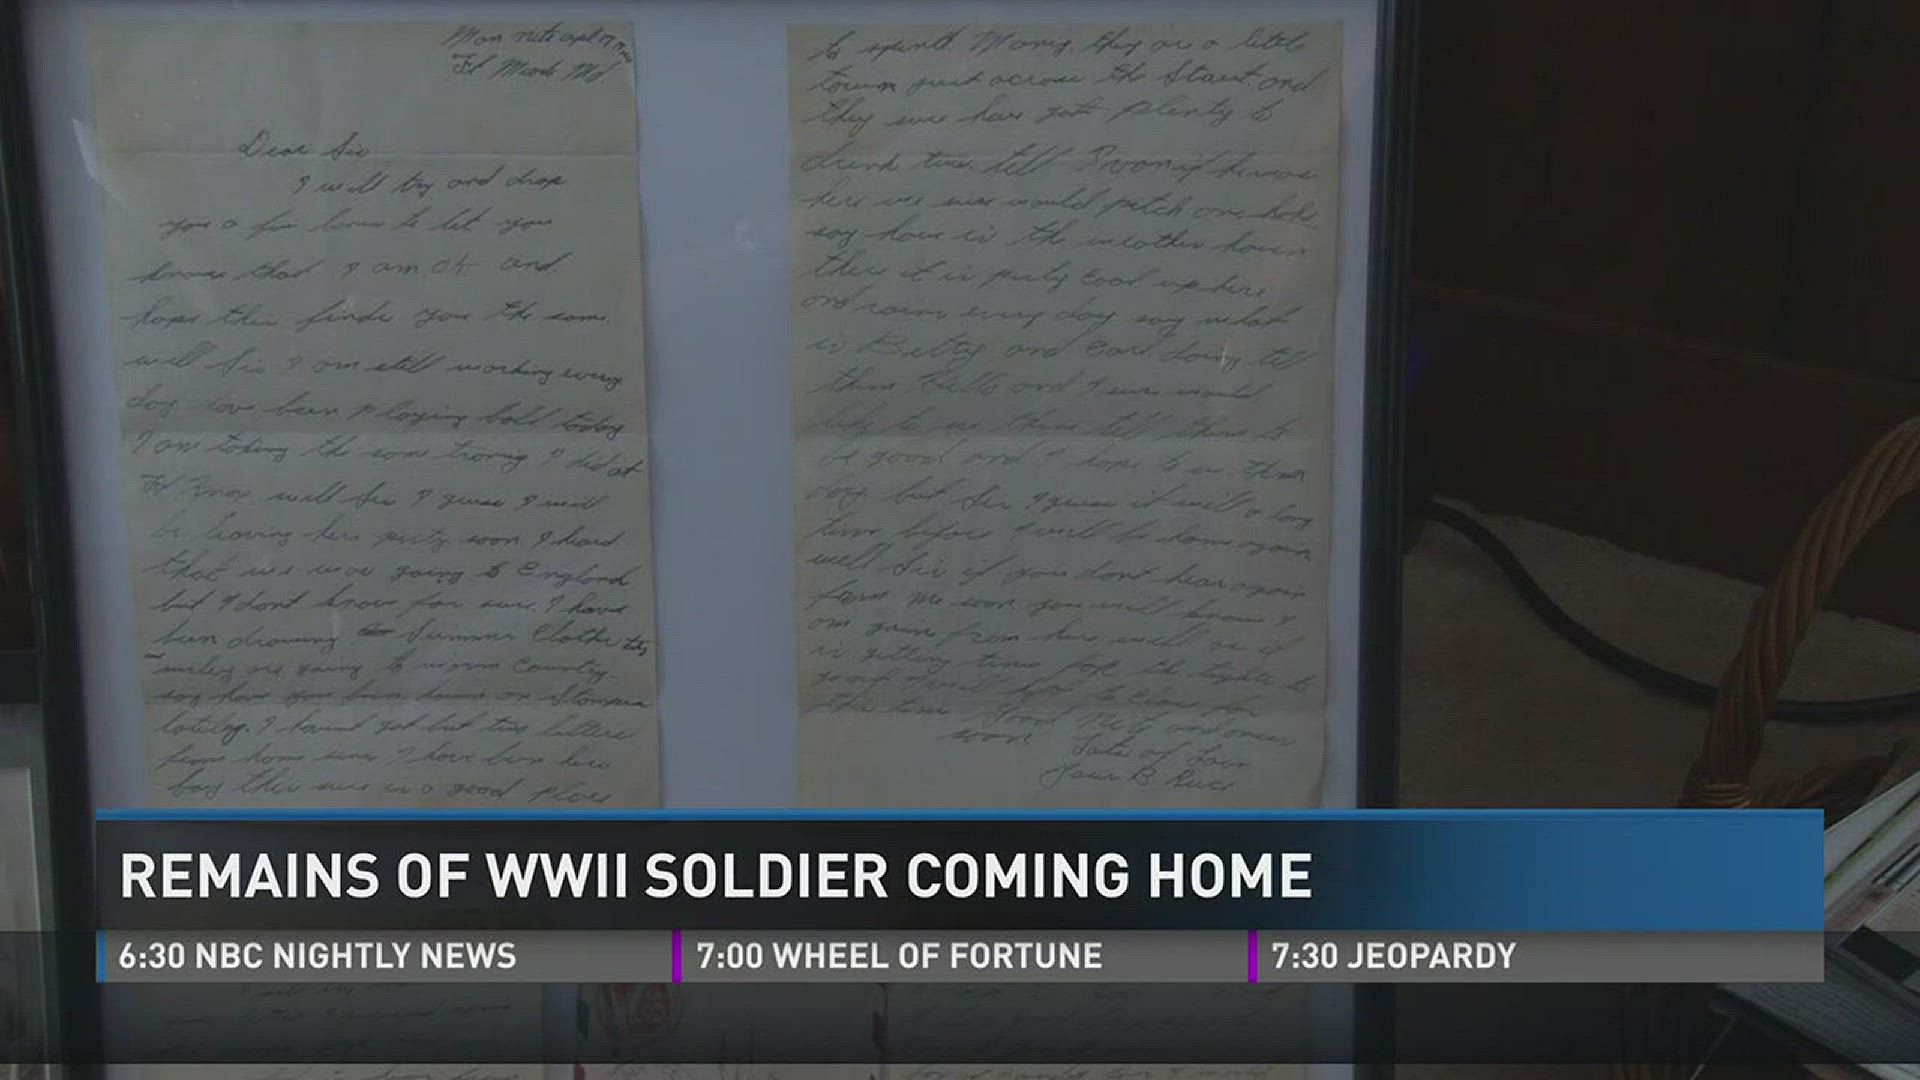 Reece Gass from Greeneville is returning home more than 70 years after he was killed in action during World War II.